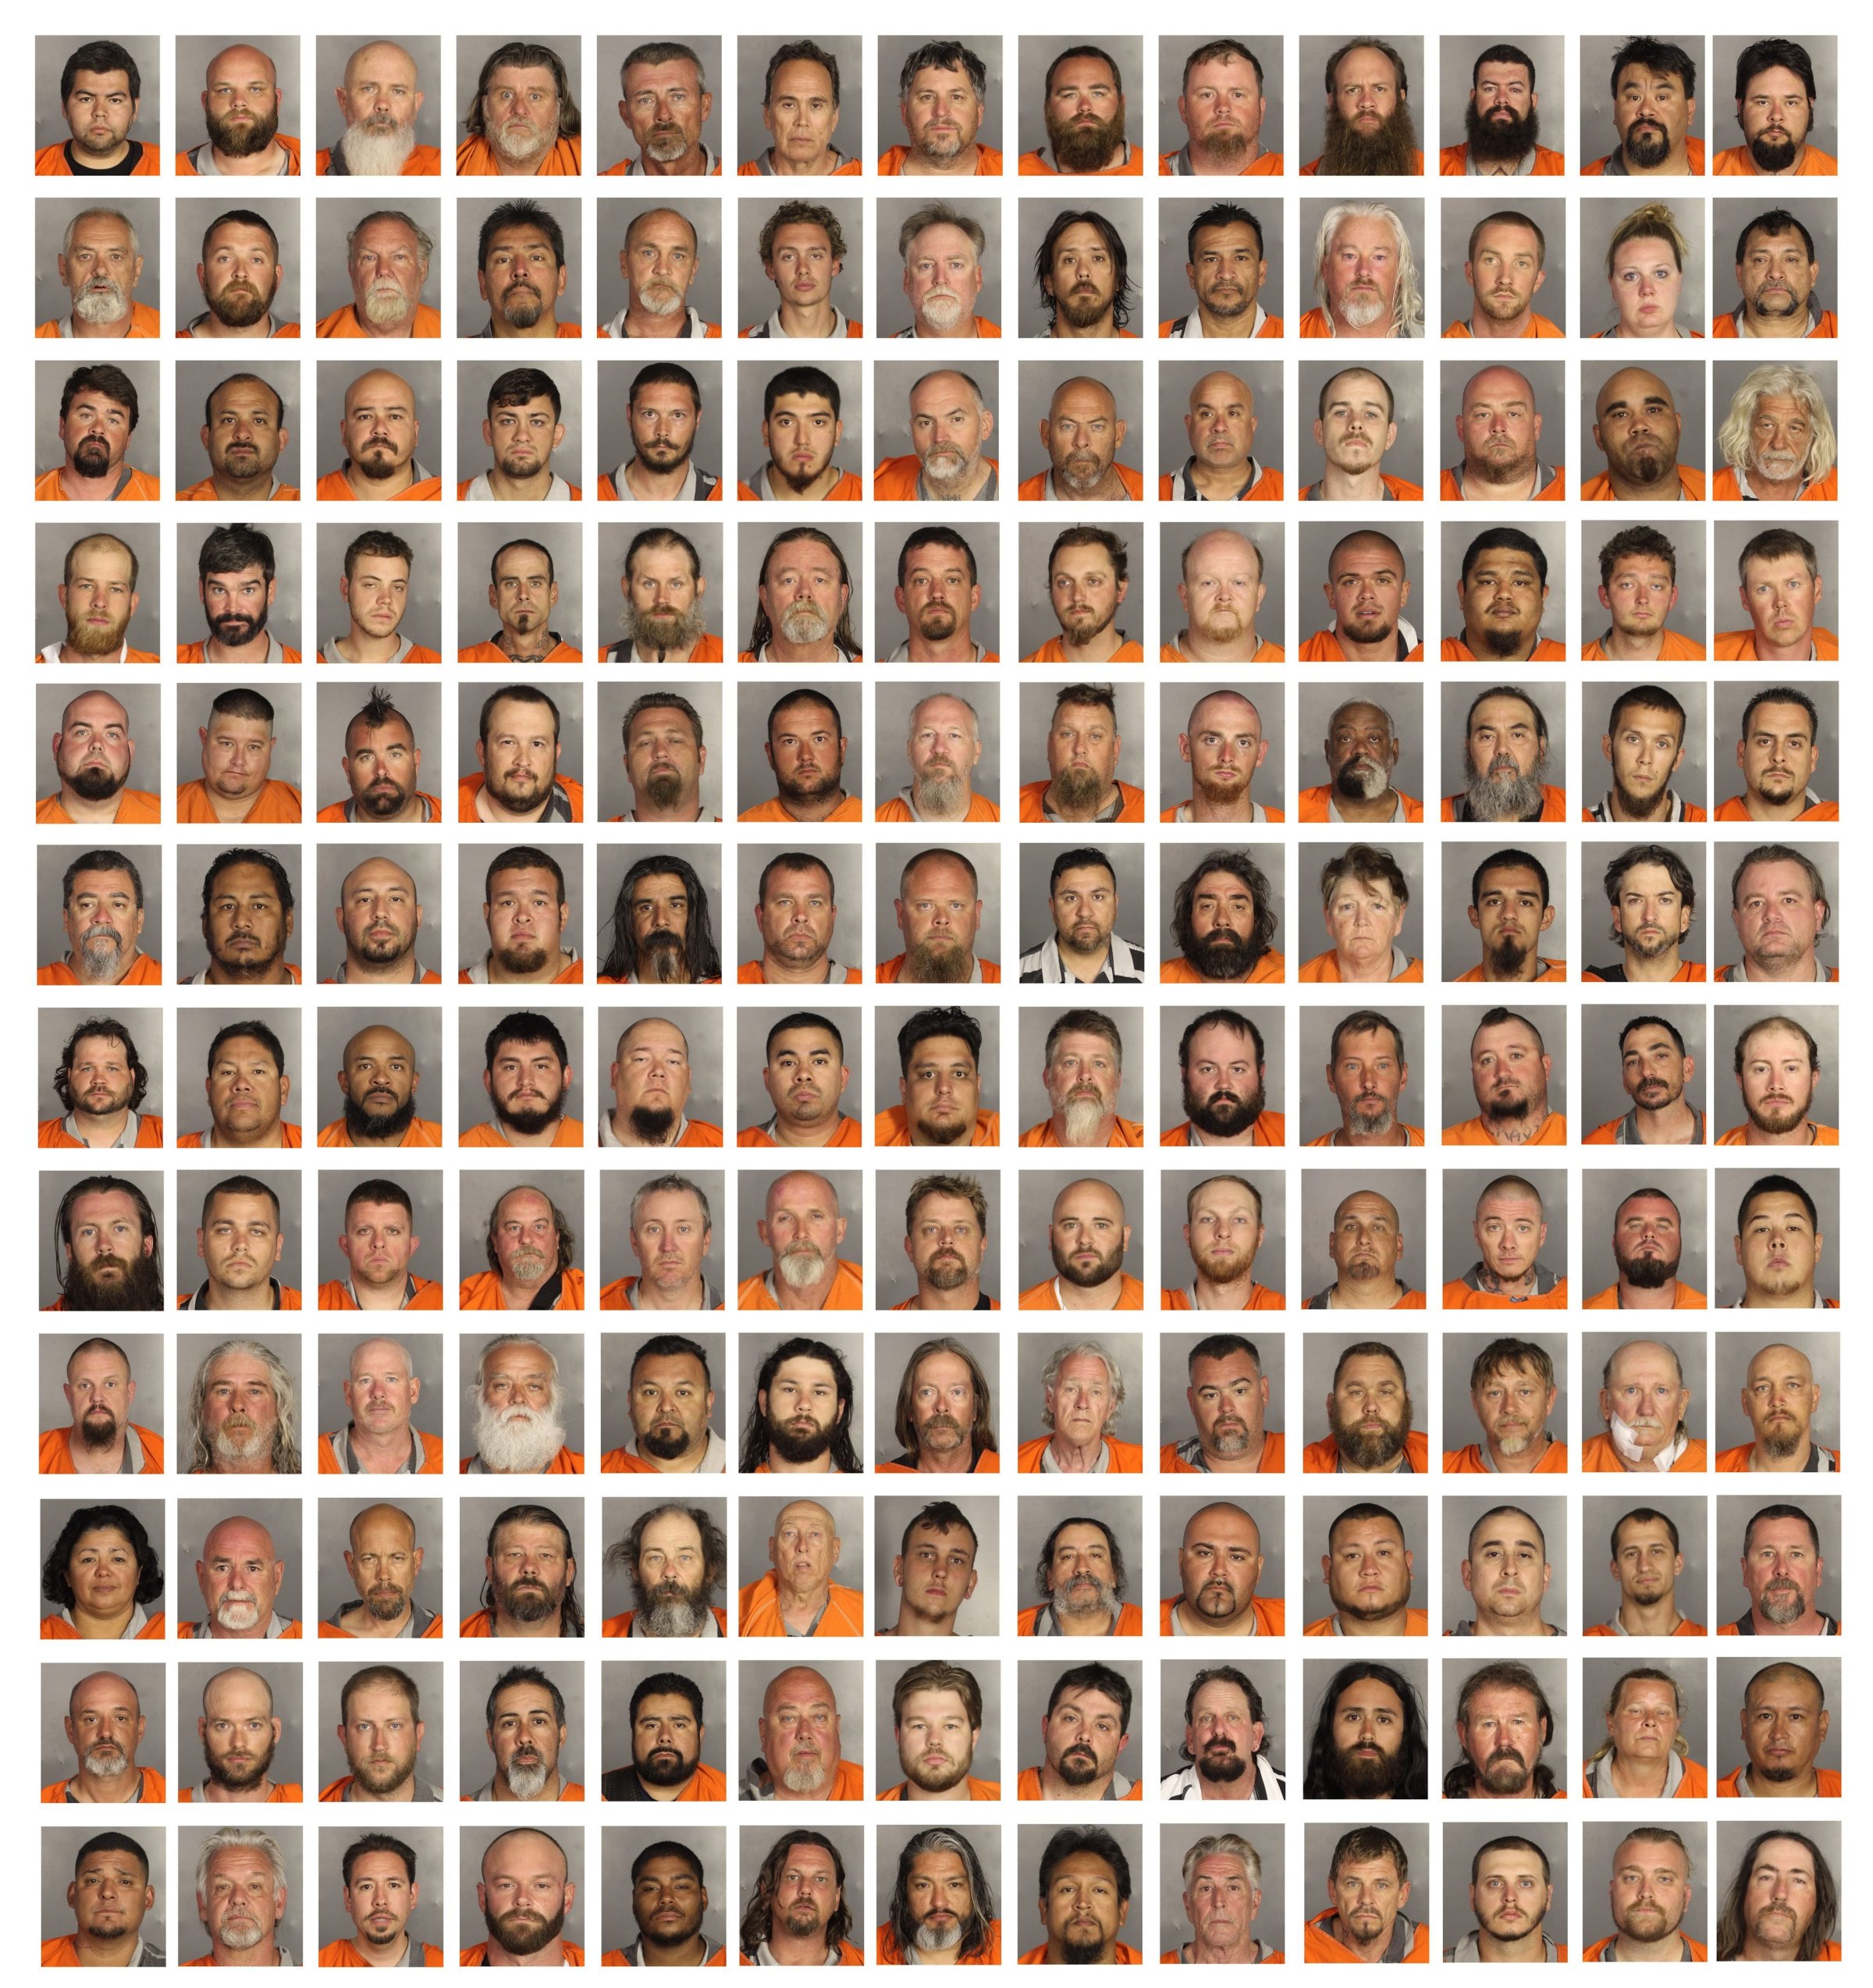 A composite image of the men and women arrested and charged with crimes stemming from a large shootout and fight between biker gangs outside the Twin Peaks bar and restaurant at the Central Texas Marketplace in Waco, Texas on May 17, 2015.